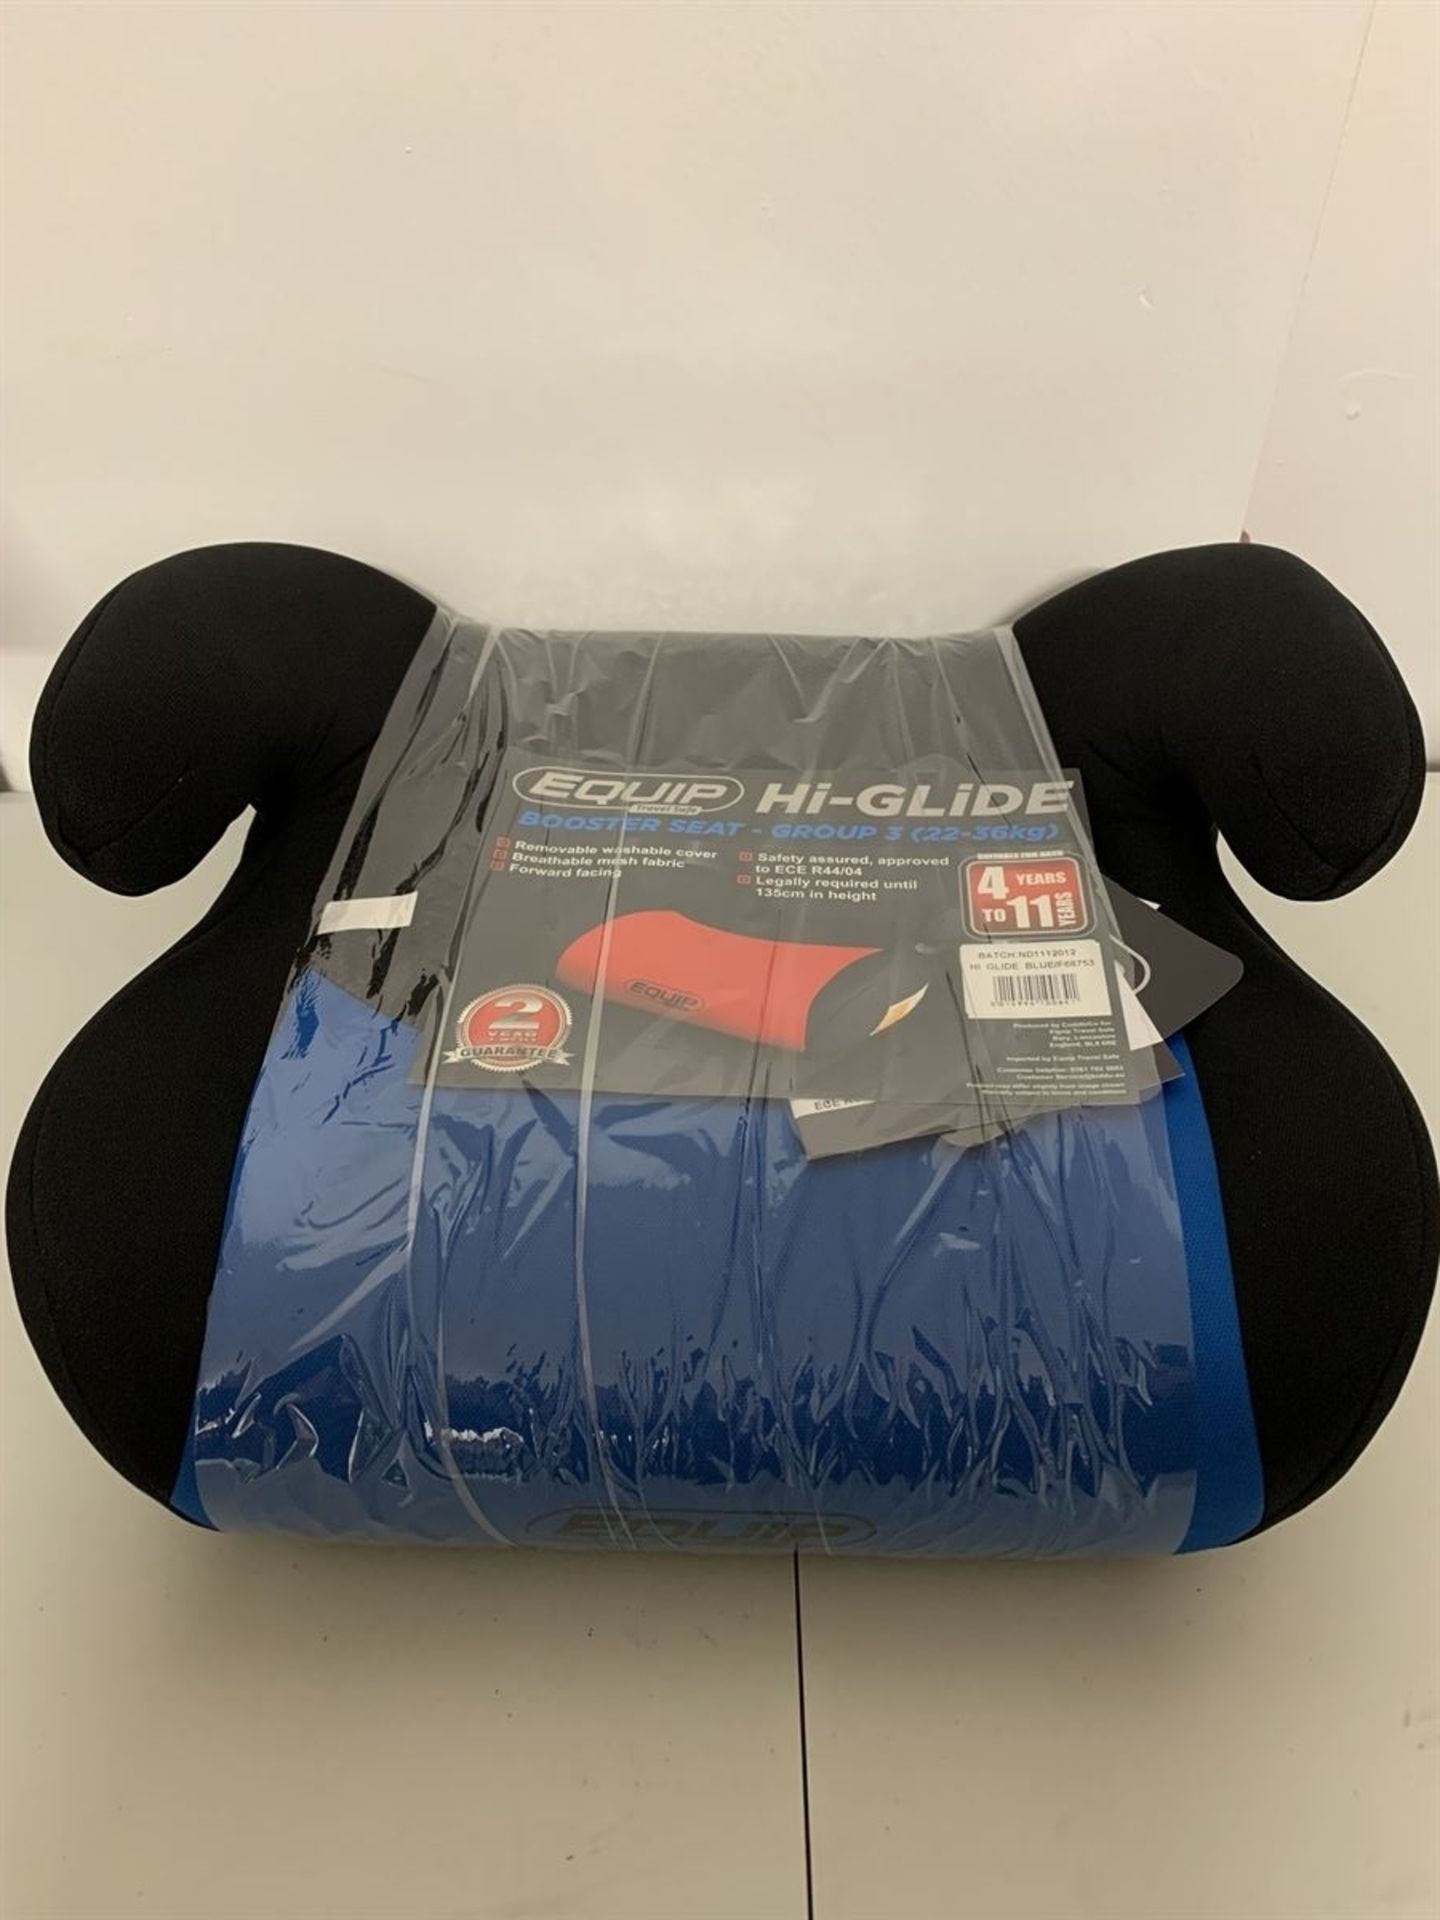 New - equip hi glide car seat (not boxed)